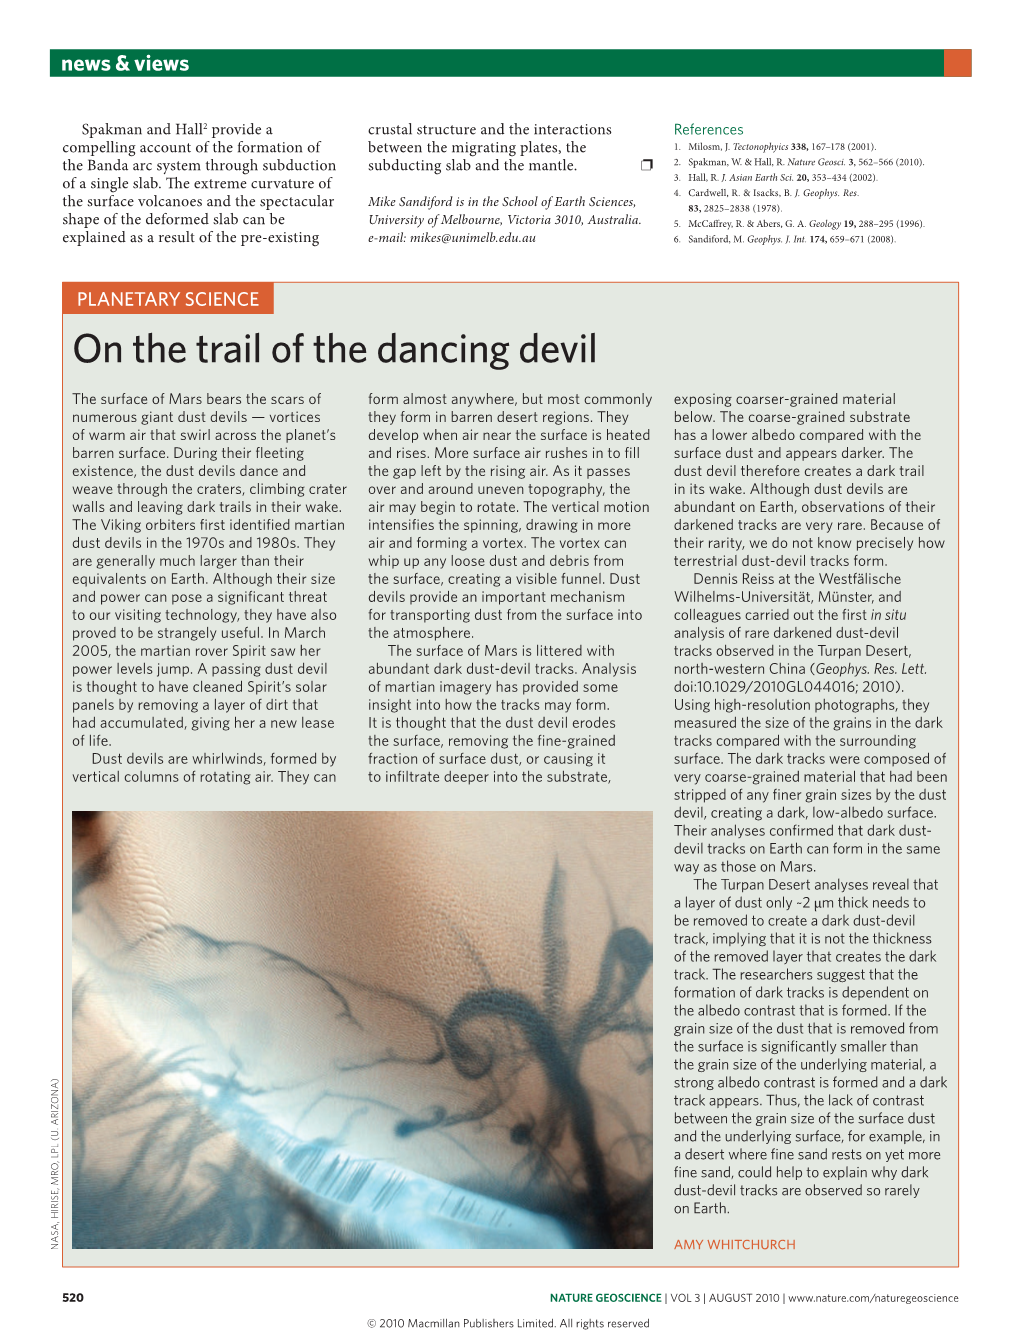 Planetary Science: on the Trail of the Dancing Devil